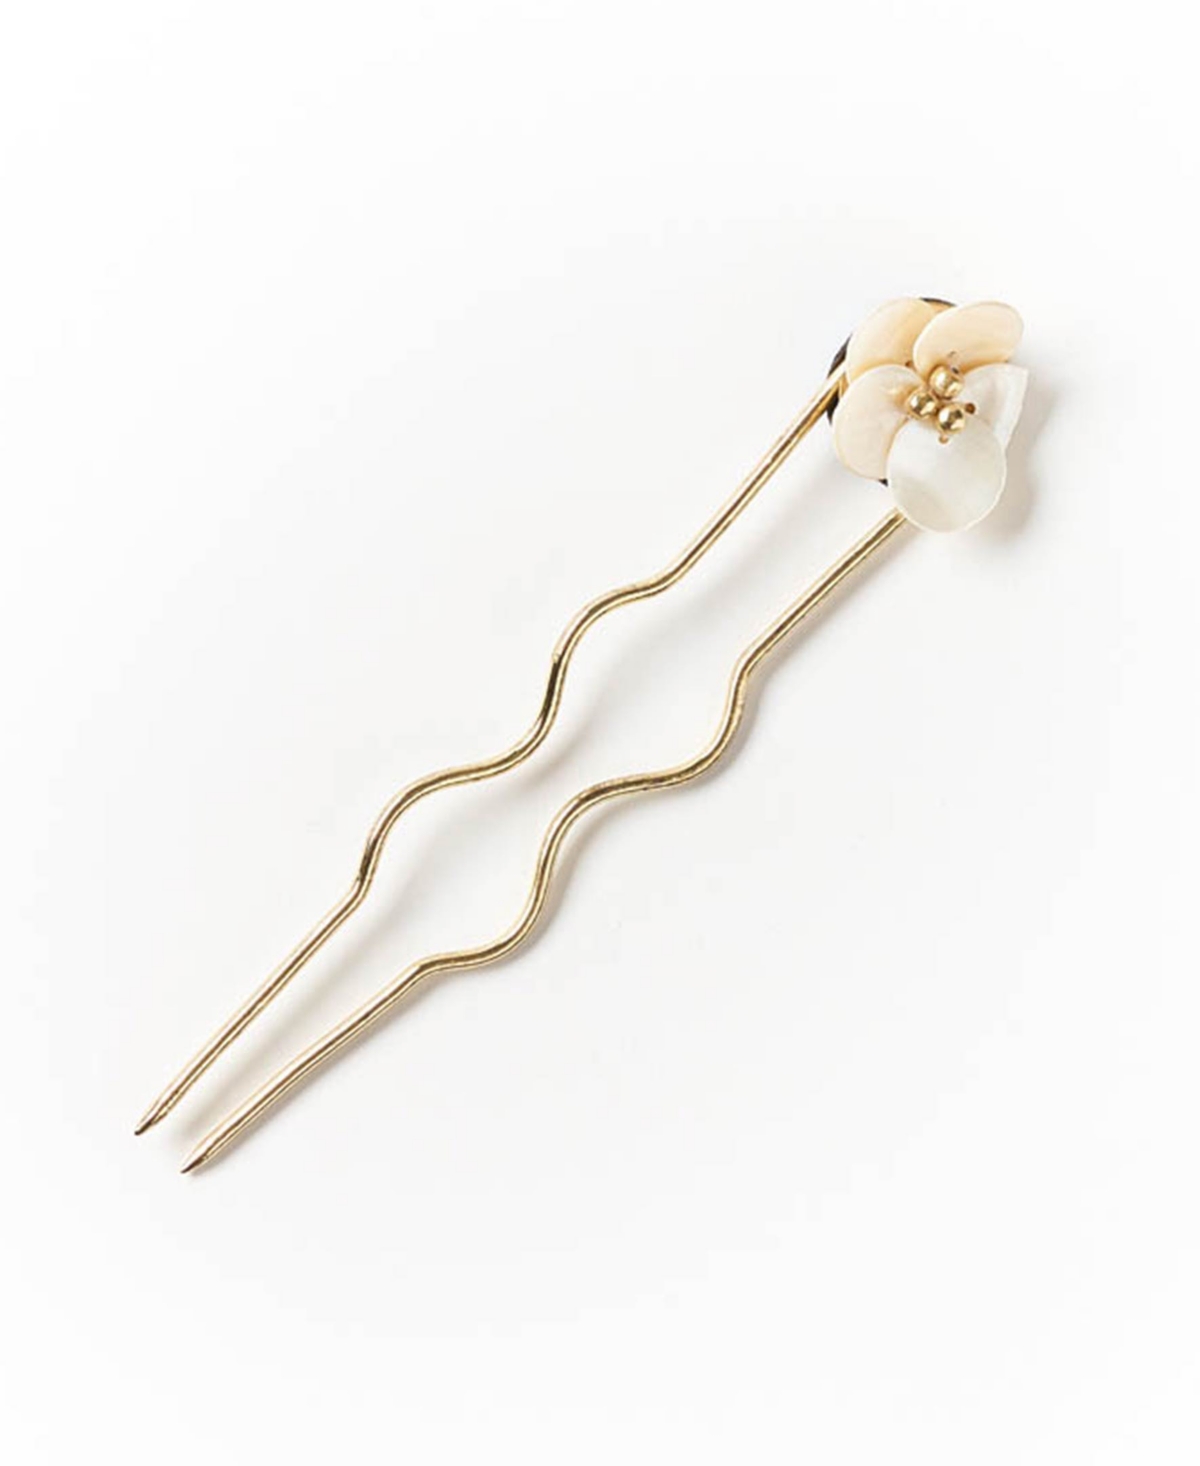 Mother of Pearl Flower with Beads Hair Pin - Cream